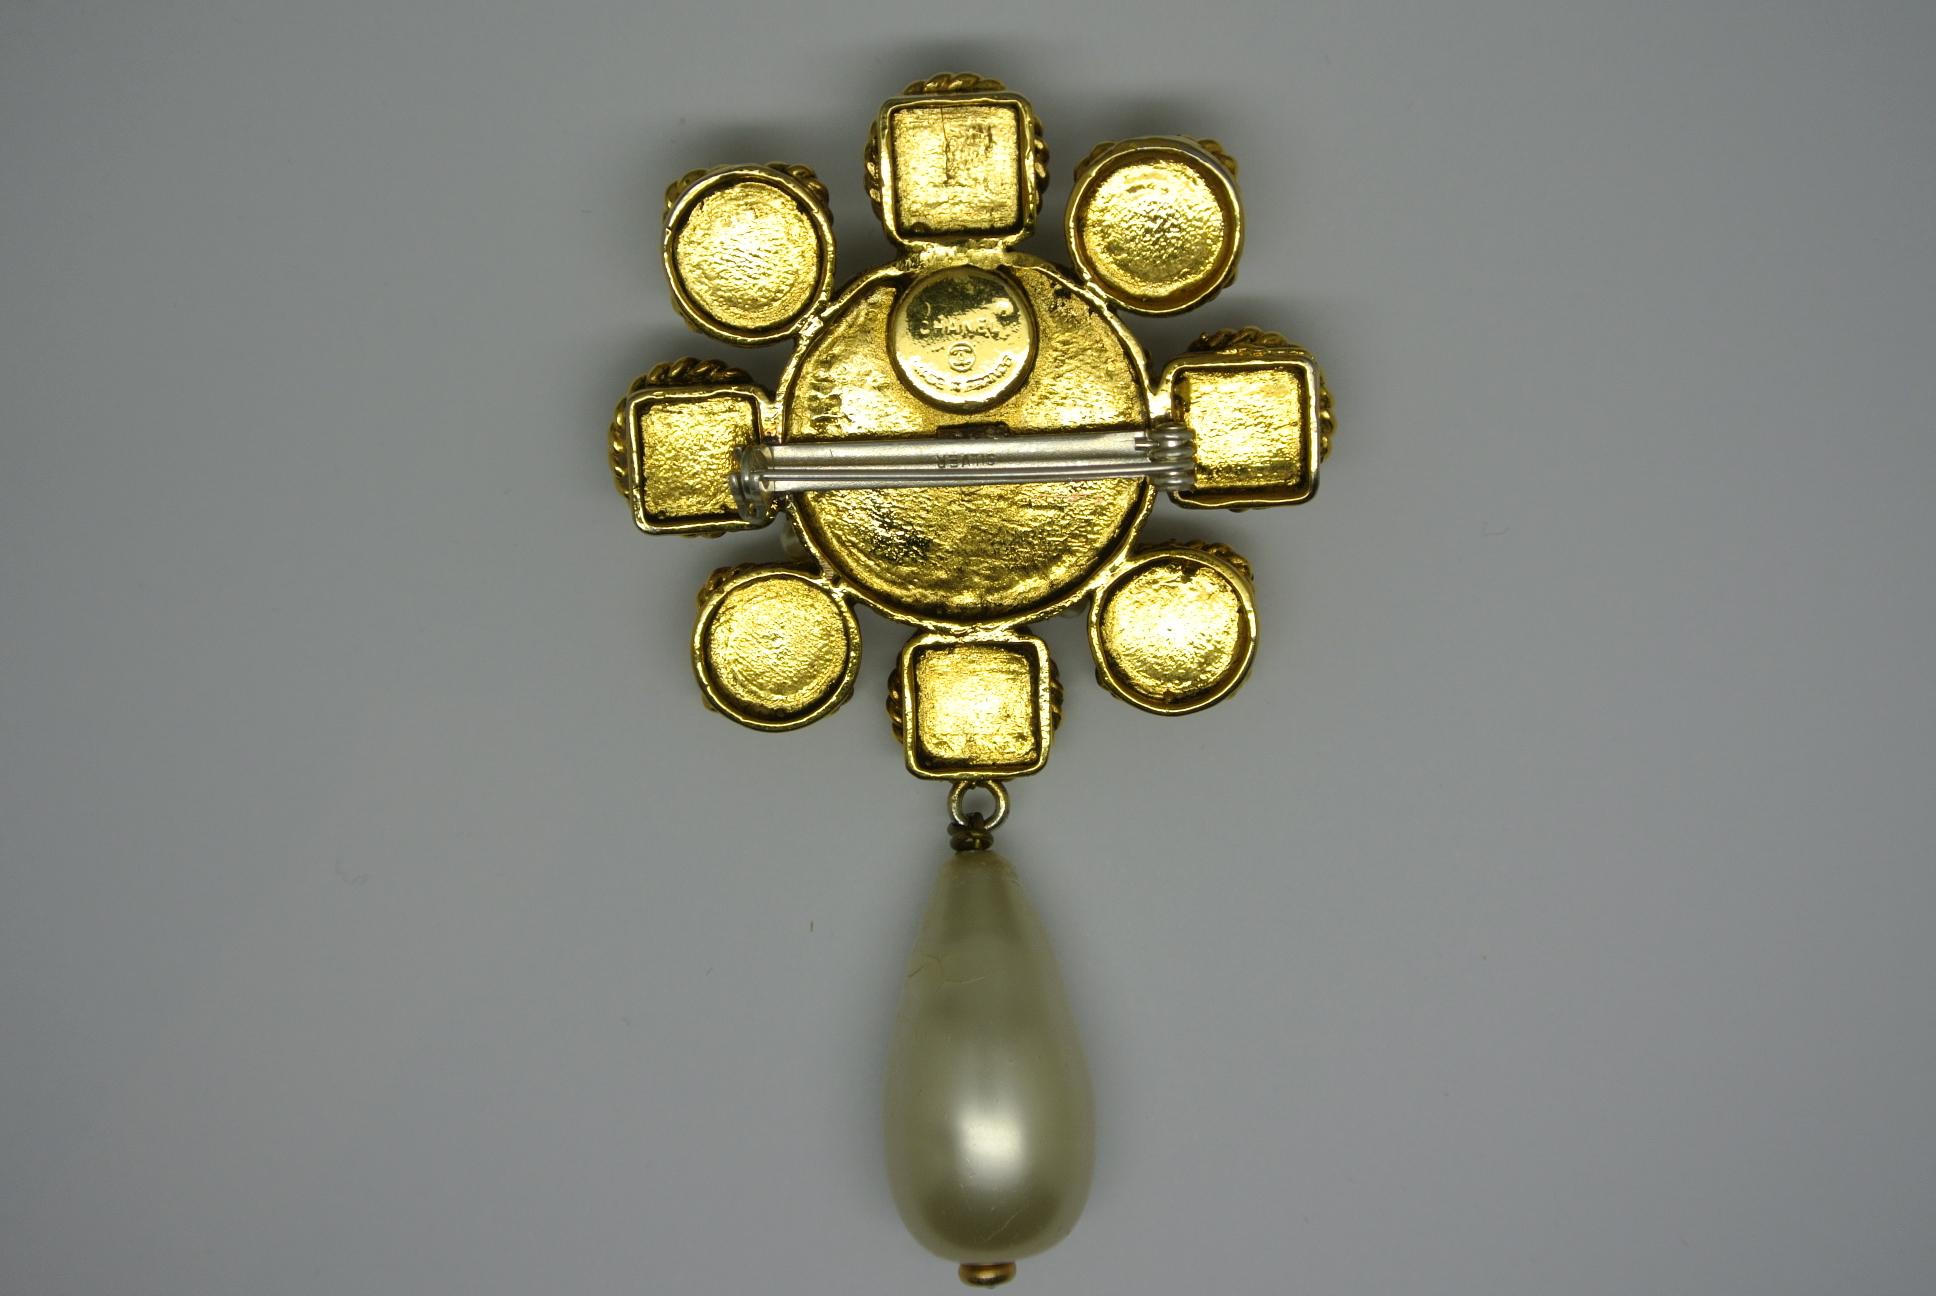 Classic Chanel brooch, comes with gold-plated metal, multi-colour poured glass and pearl drop.  The pin has been changed into silver-one by previous owner. 